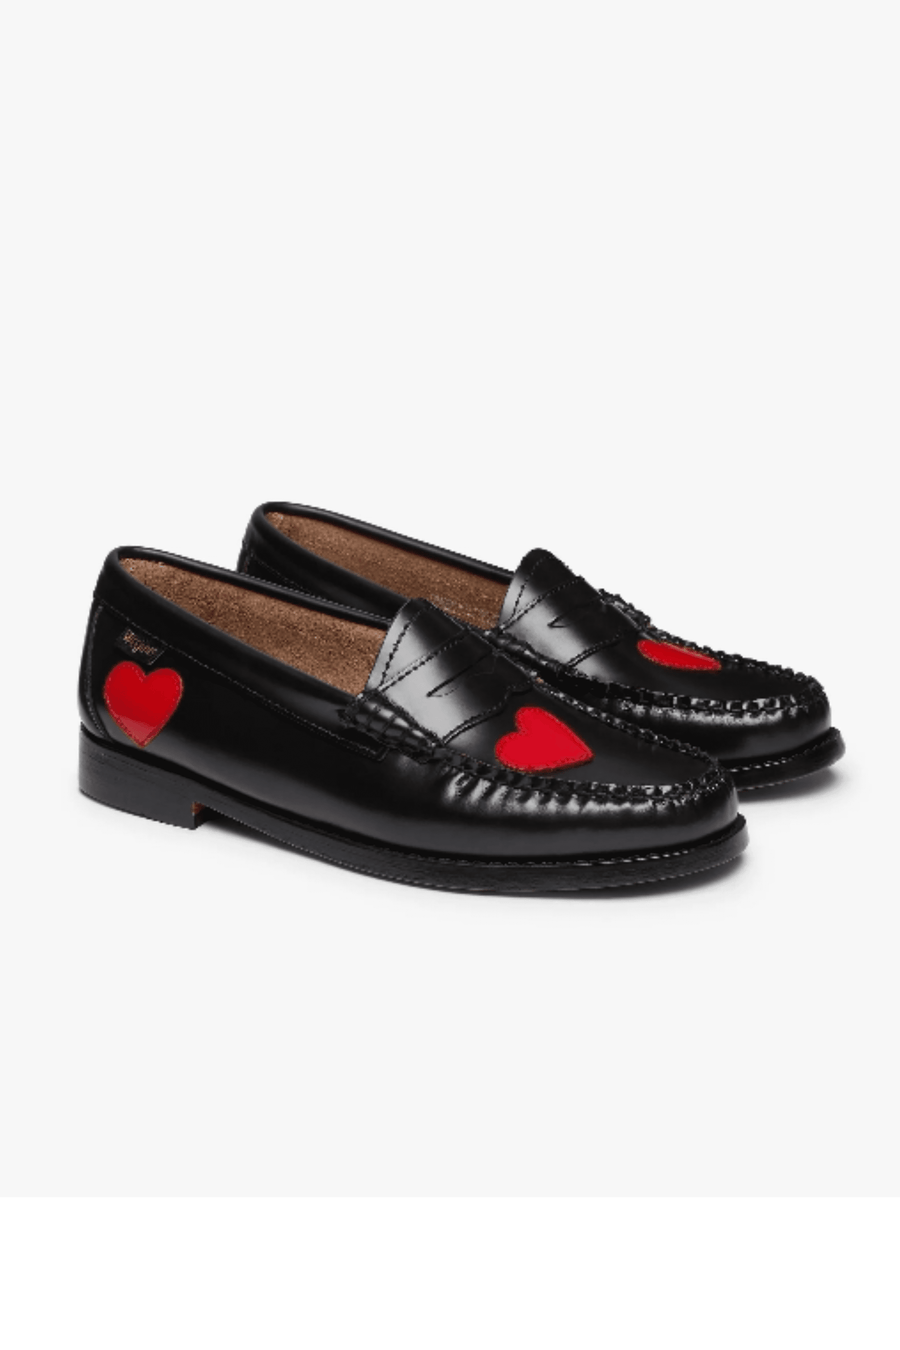 G.H. Bass Weejun Penny Love Loafers